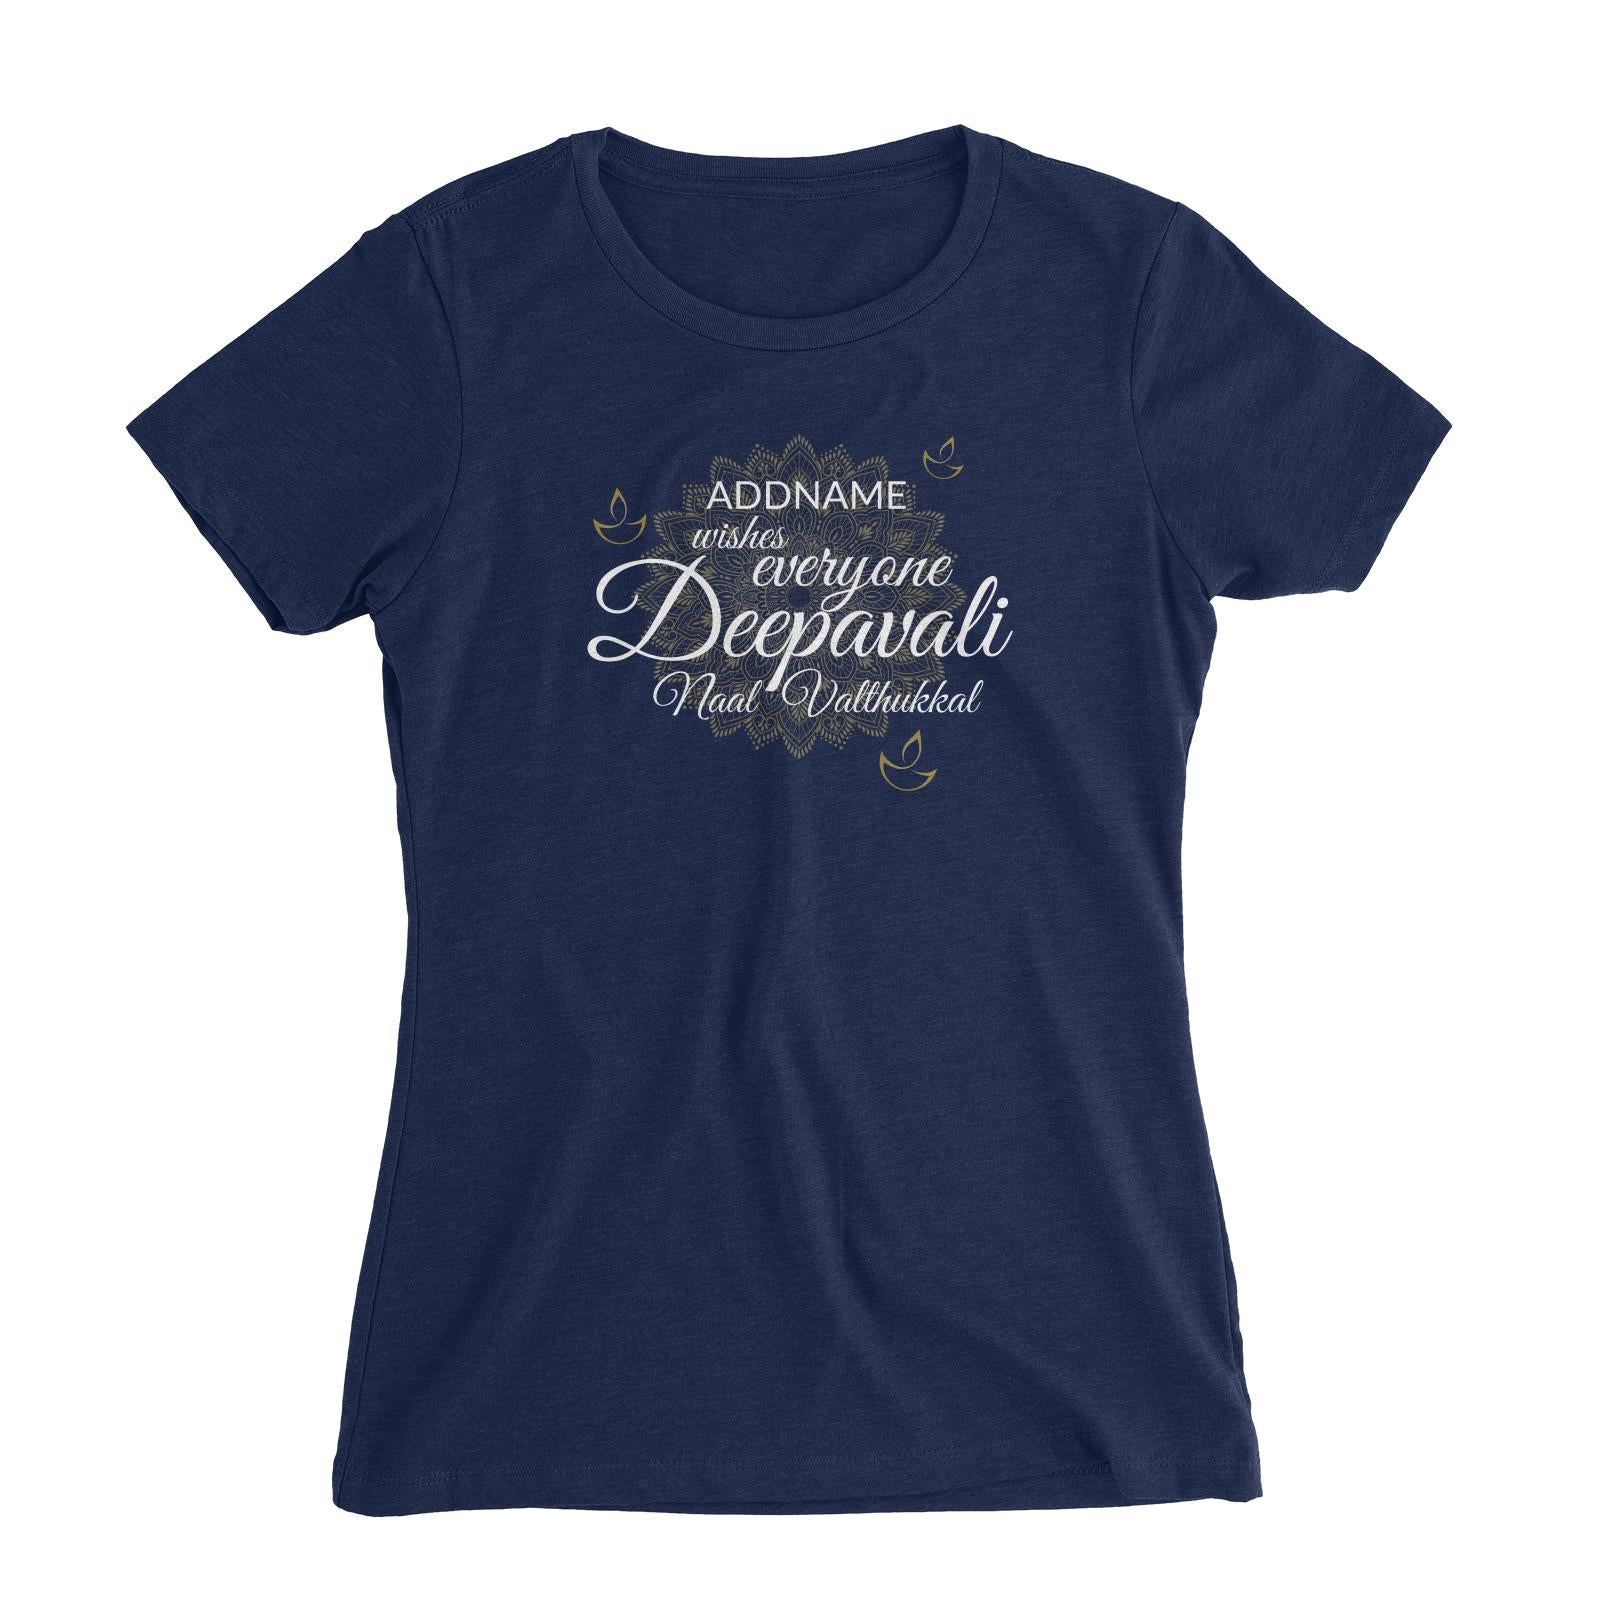 Addname Wishes Everyone Deepavali with Mandala Women's Slim Fit T-Shirt